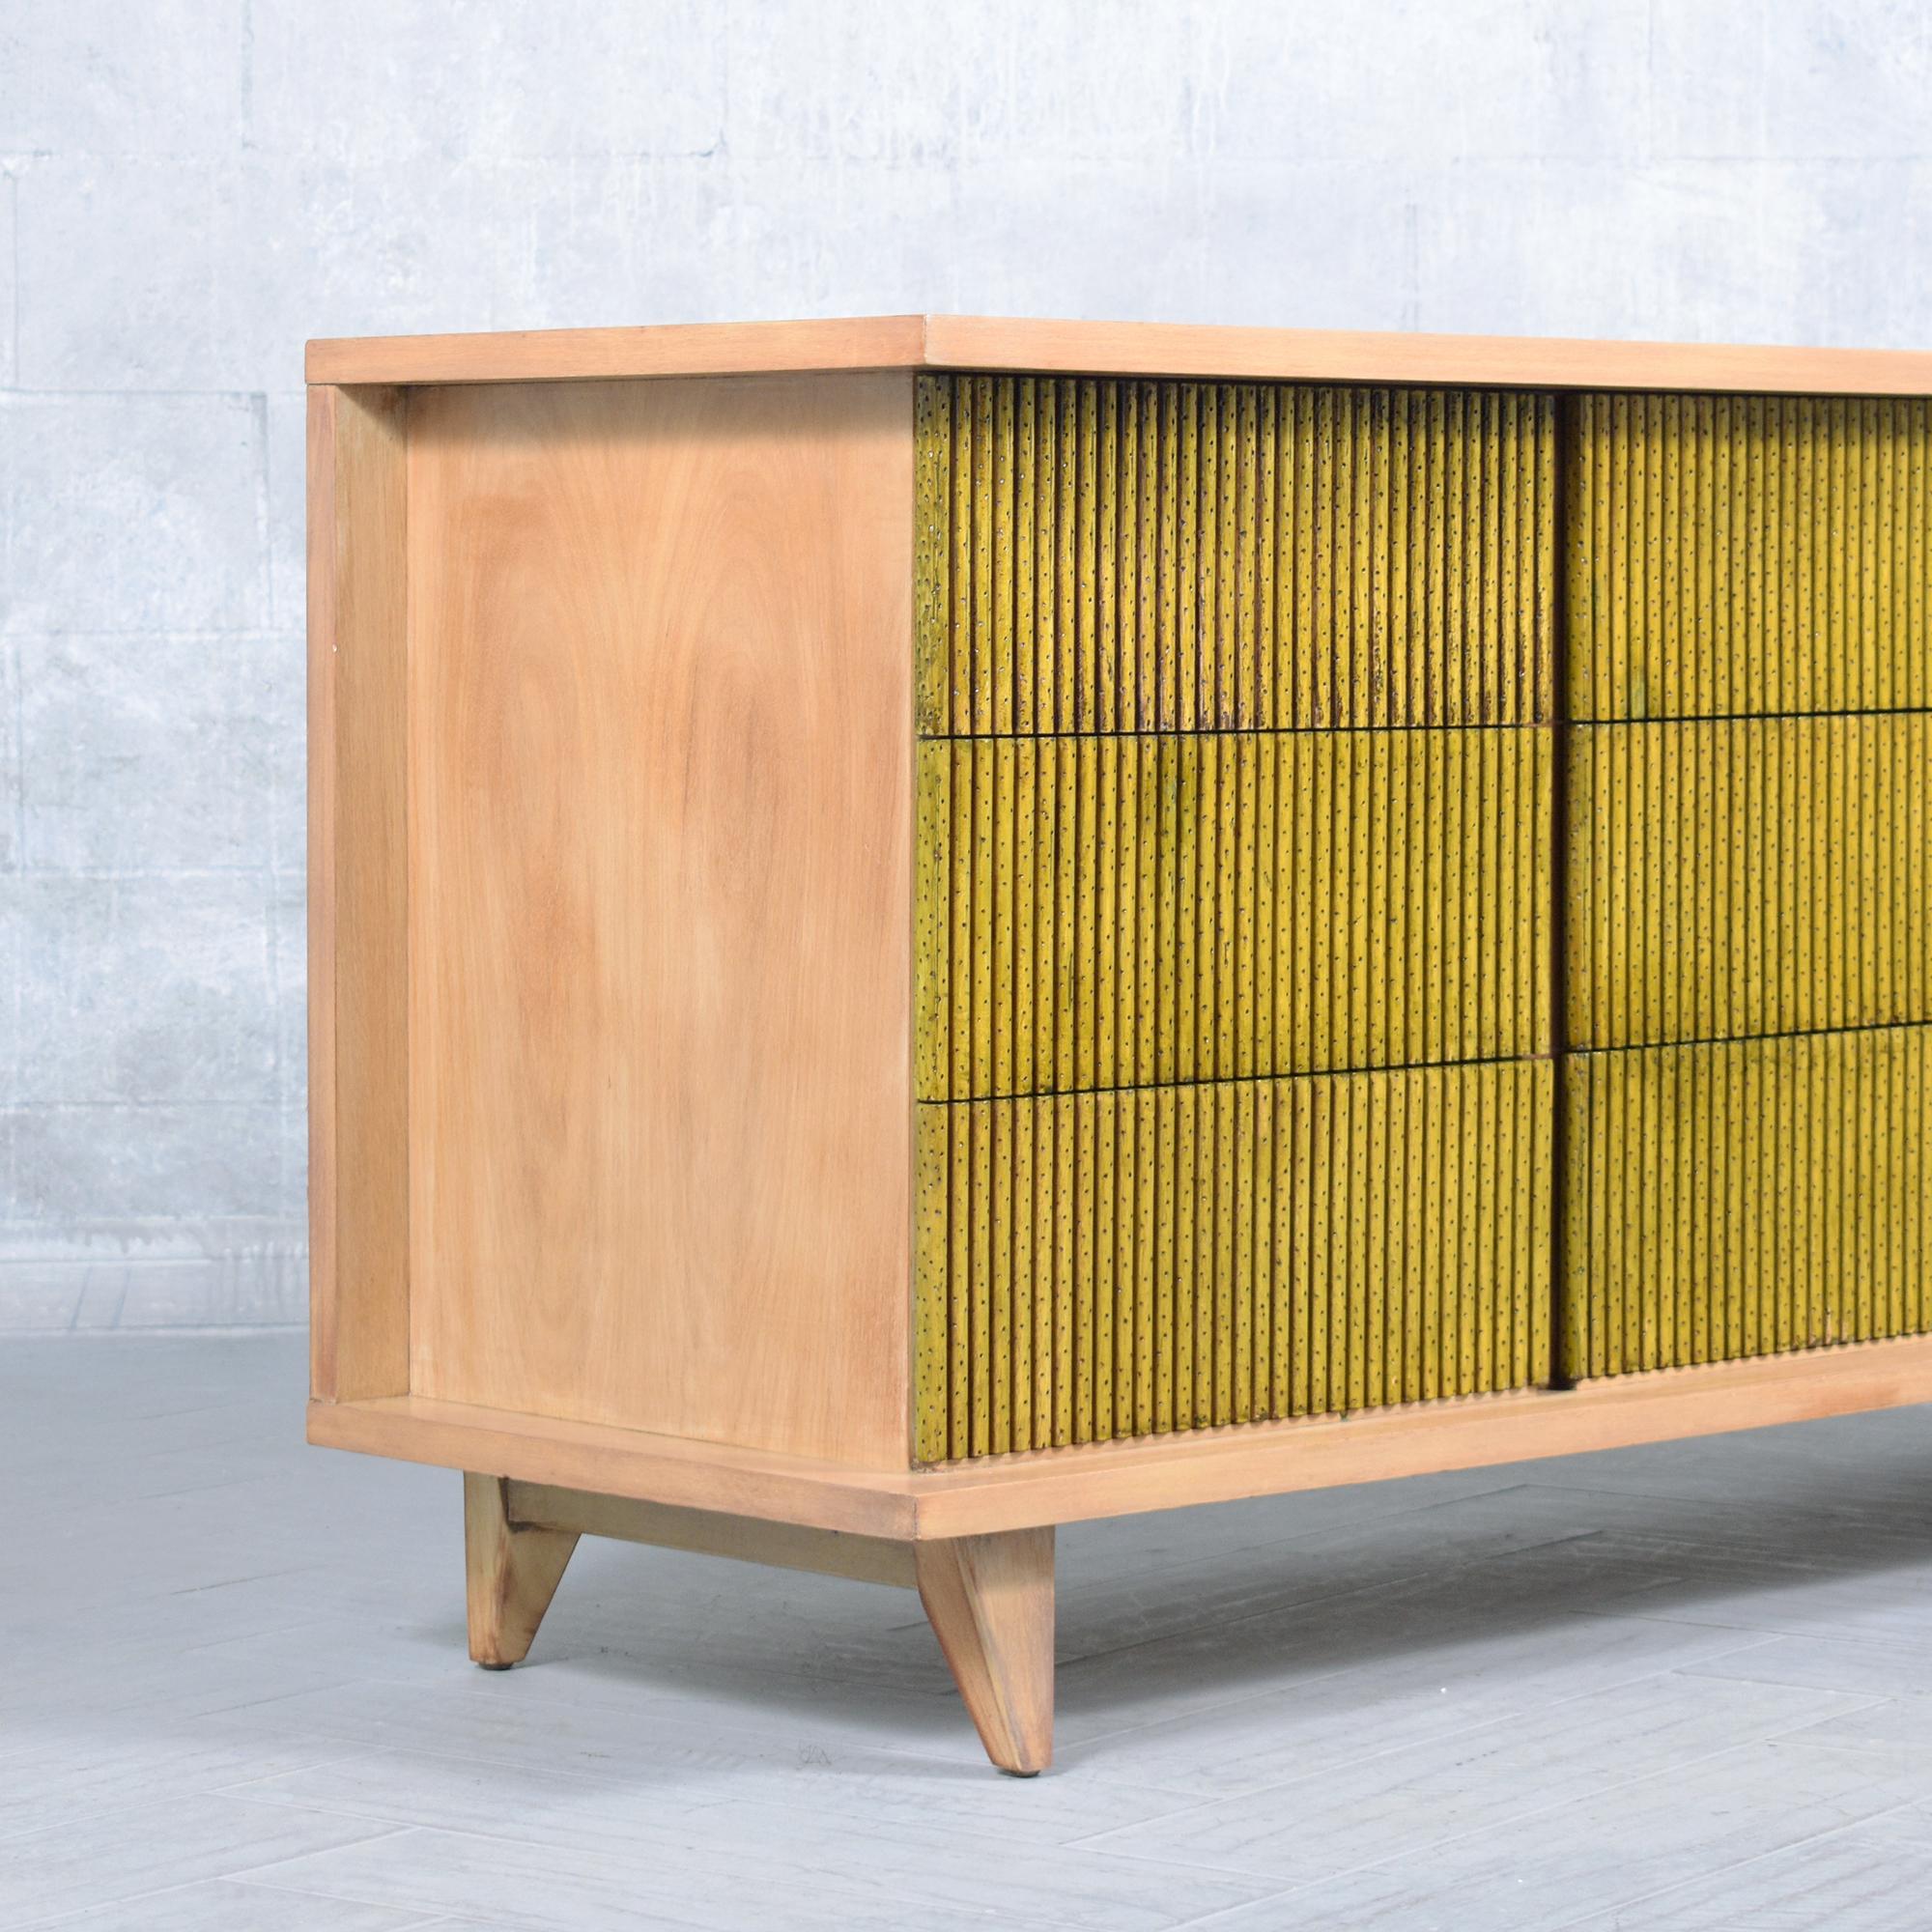 1960s Walnut Mid-Century Organic Modern Chest of Drawers: Handcrafted & Restored For Sale 5